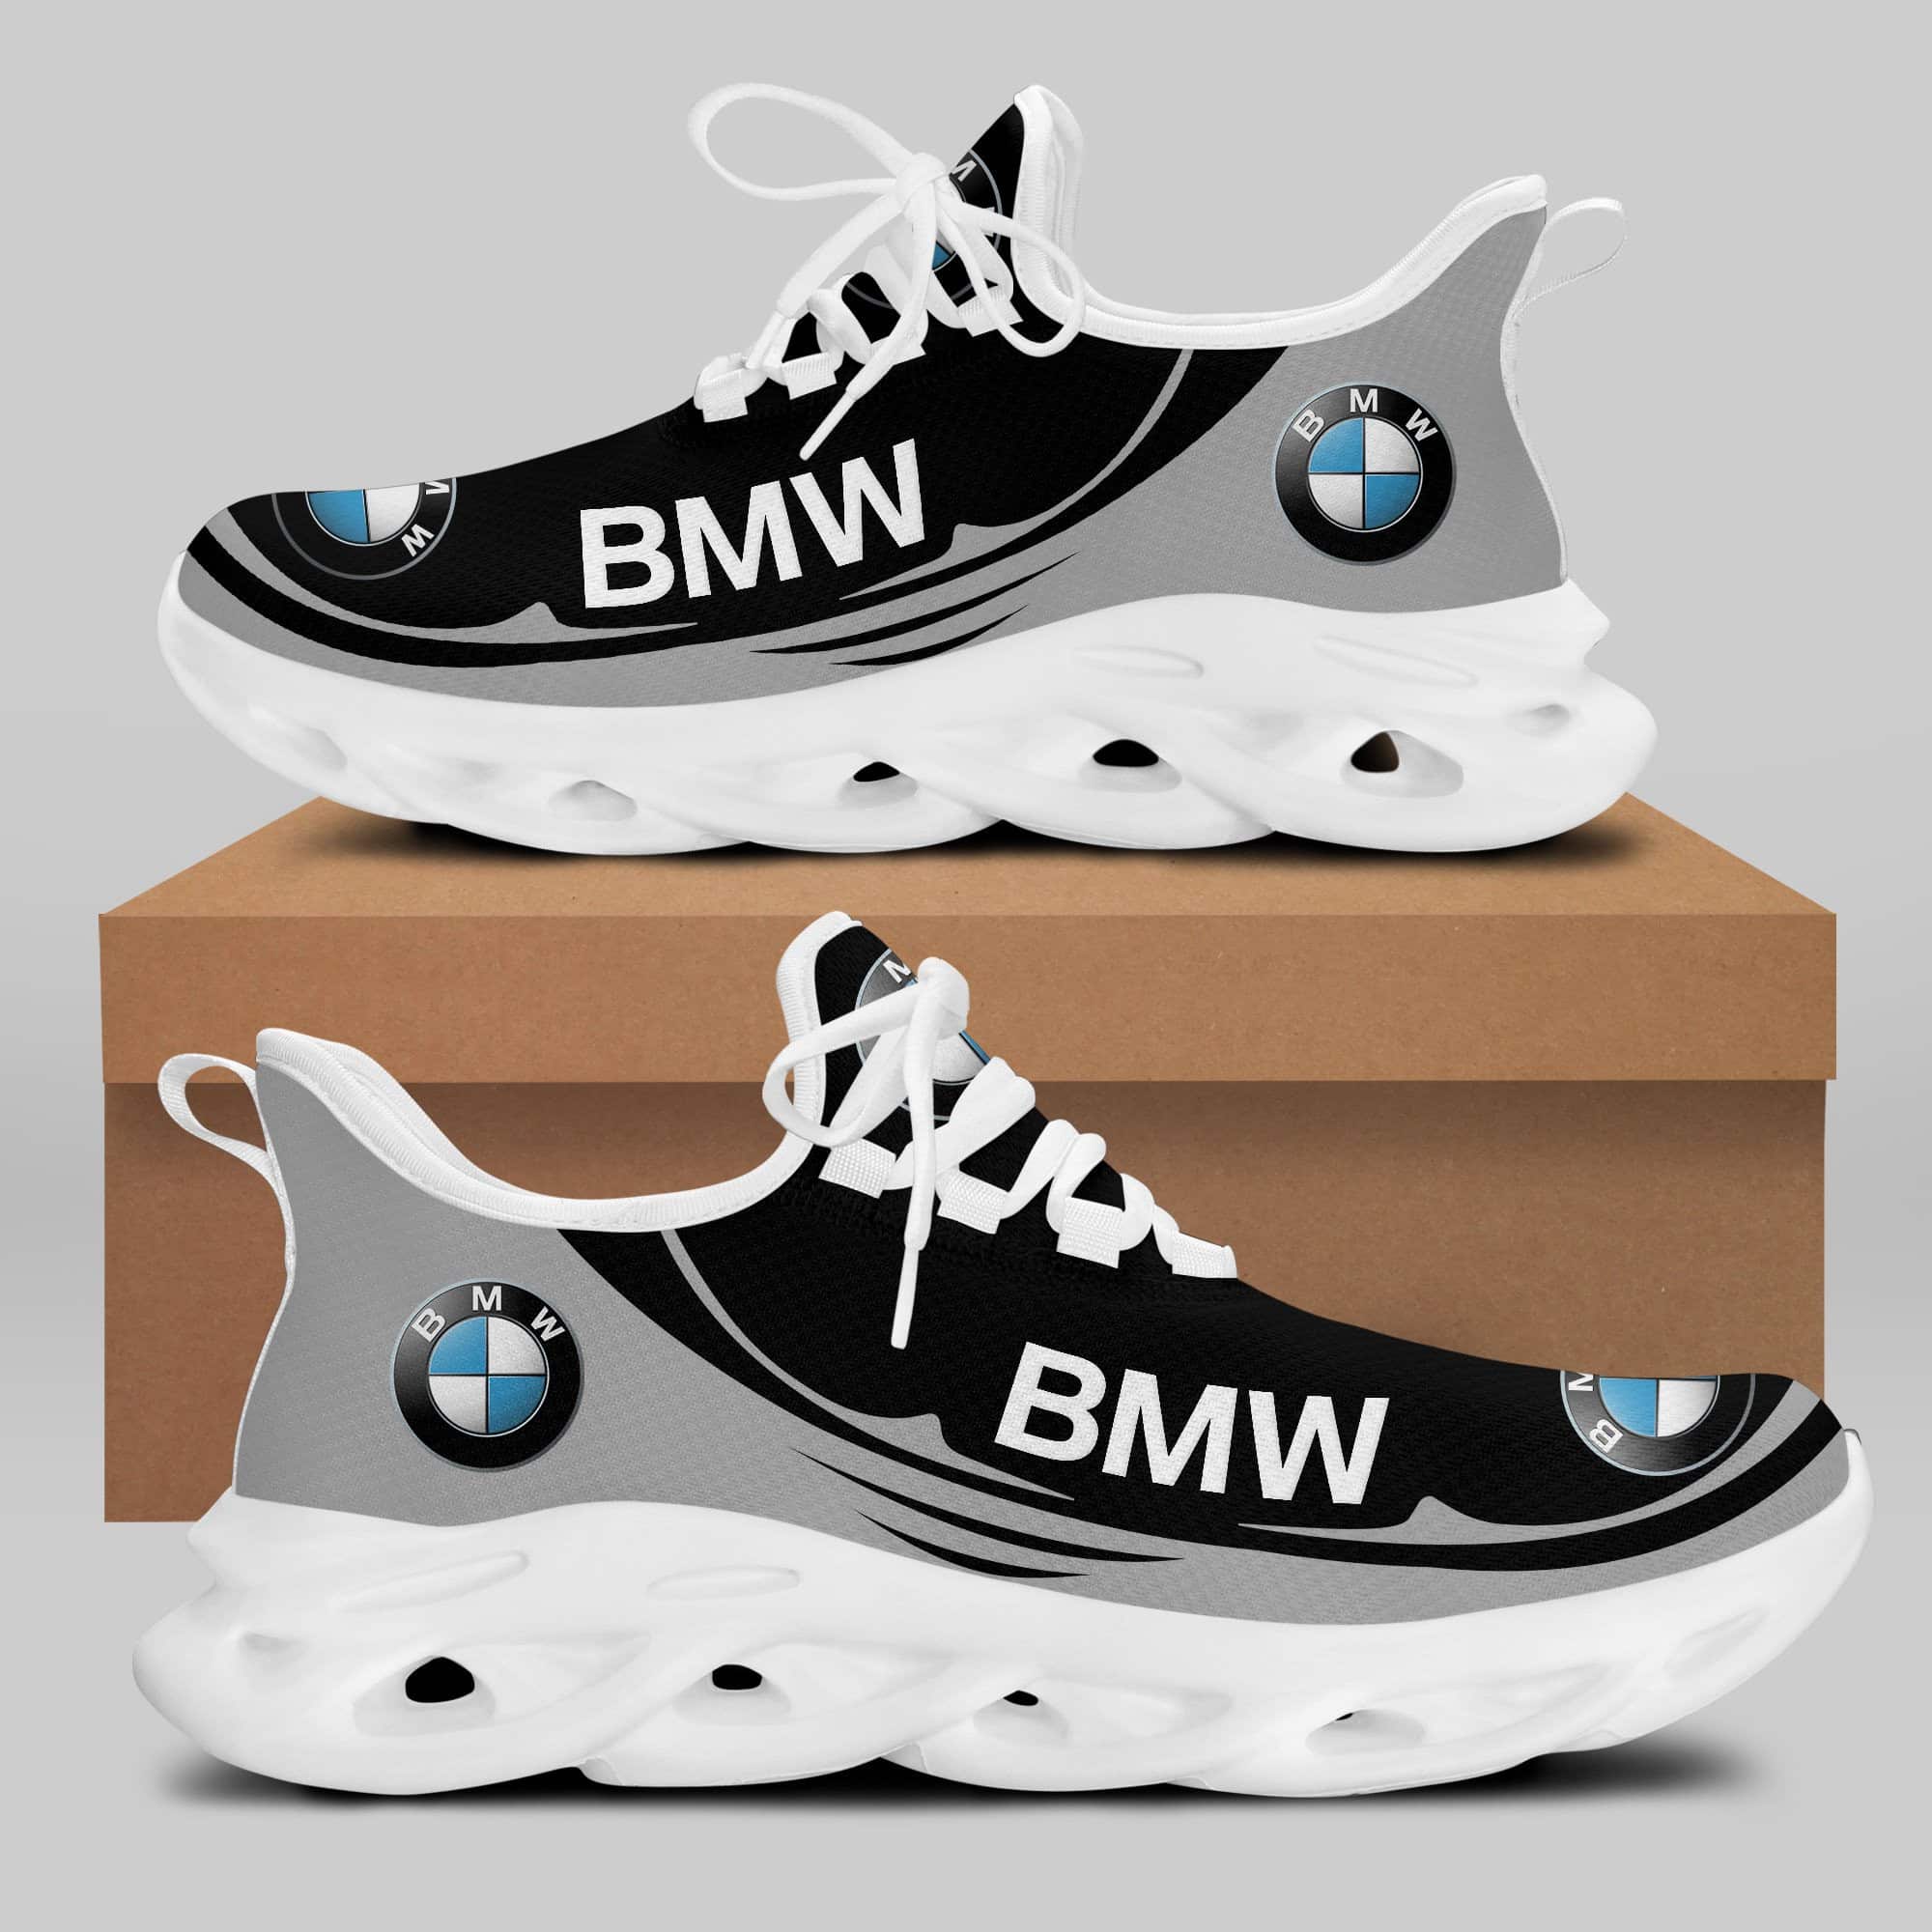 Bmw Running Shoes Max Soul Shoes Sneakers Ver 31 1